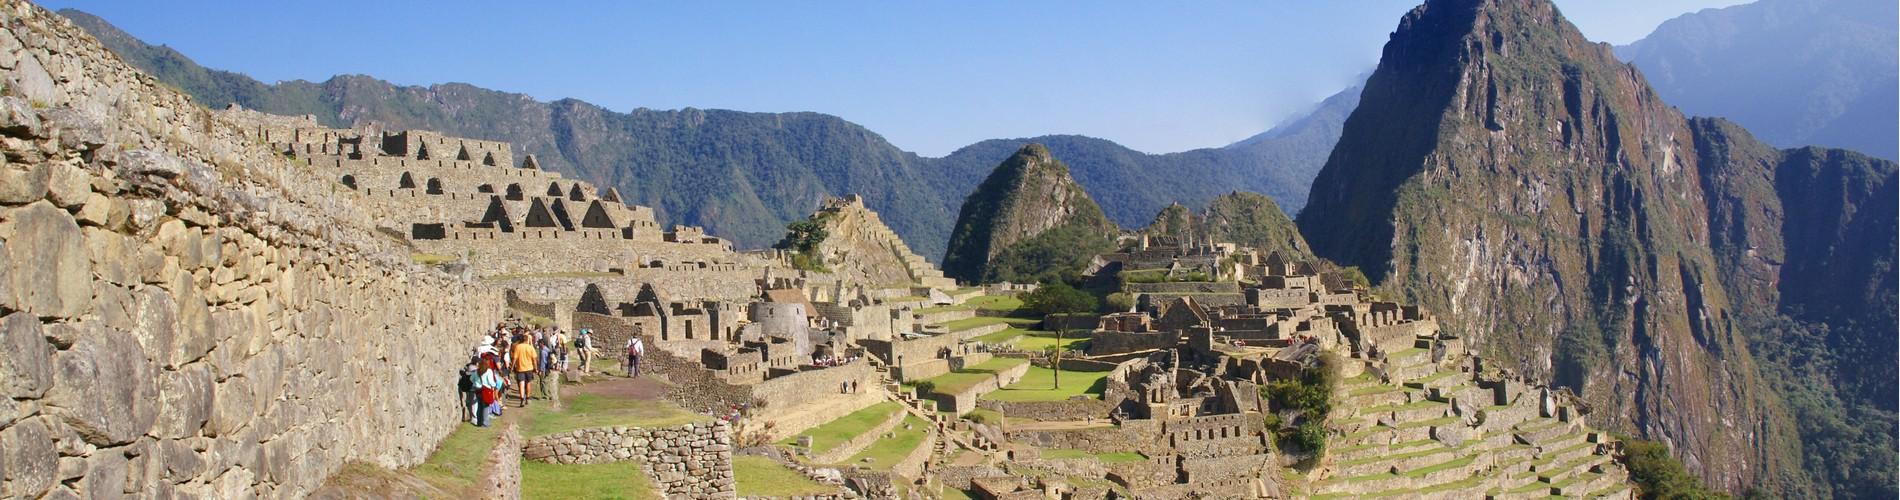 What you need to know about The Huayna Picchu Mountain